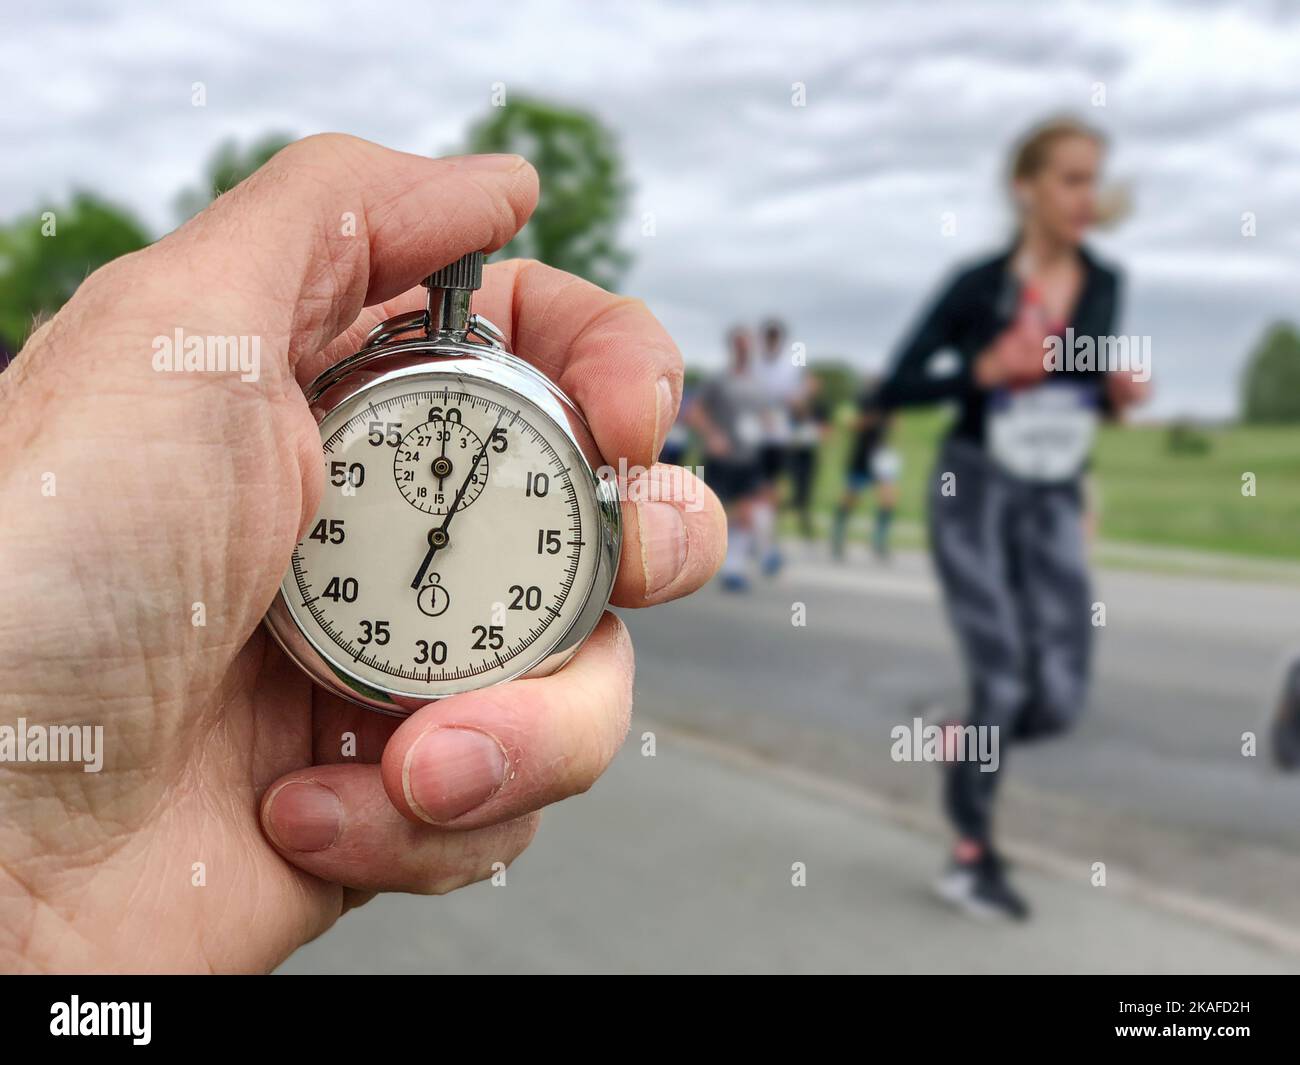 keeping time for runners in marathon race Stock Photo